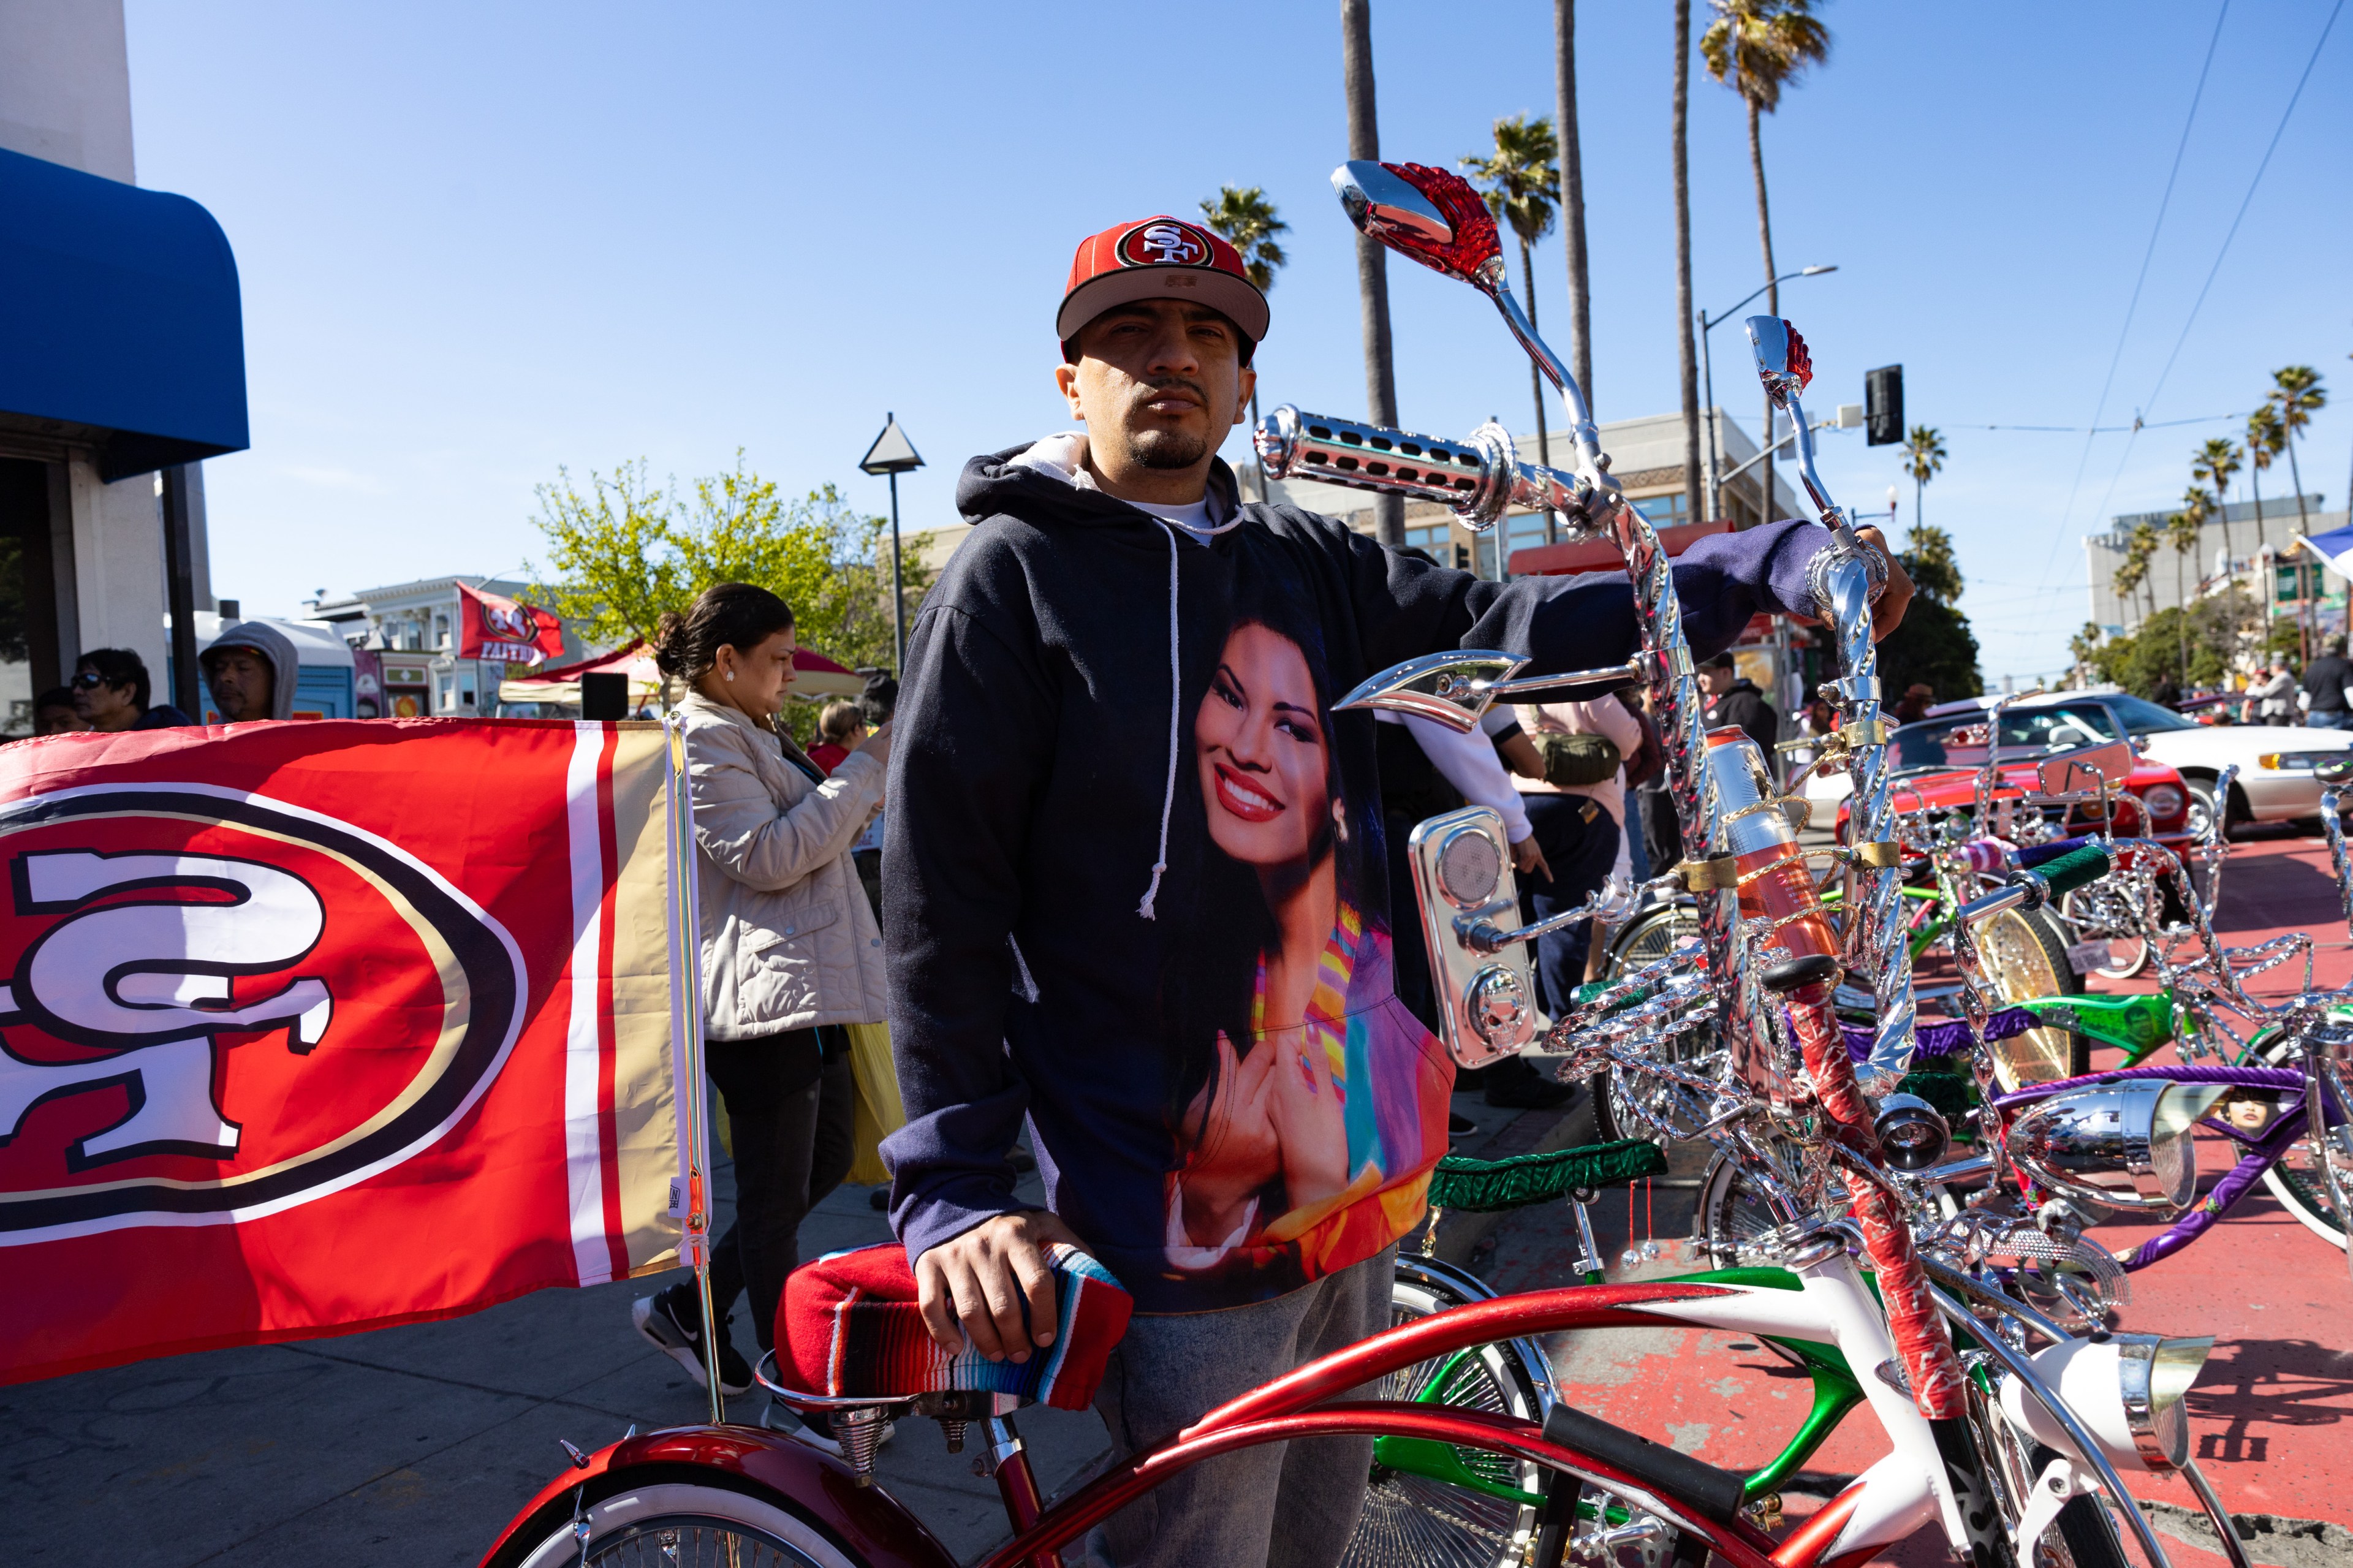 A man stands with custom lowrider bicycles, wearing a cap and a hoodie with a woman's face. A sports team flag is in the background.